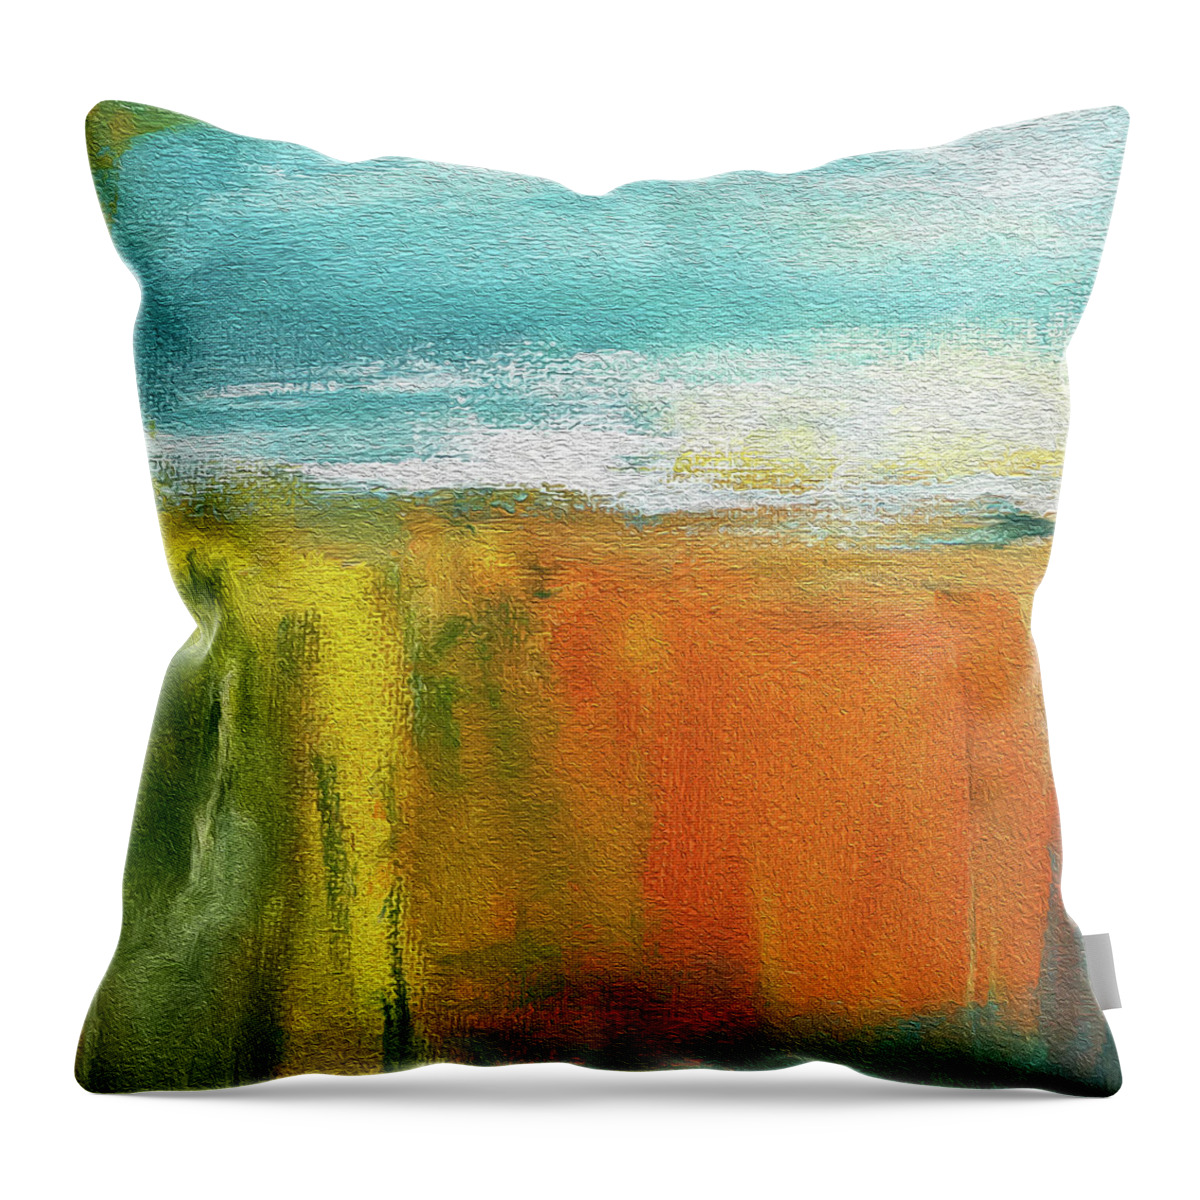 Cliff Throw Pillow featuring the mixed media The Cliffs by Linda Bailey